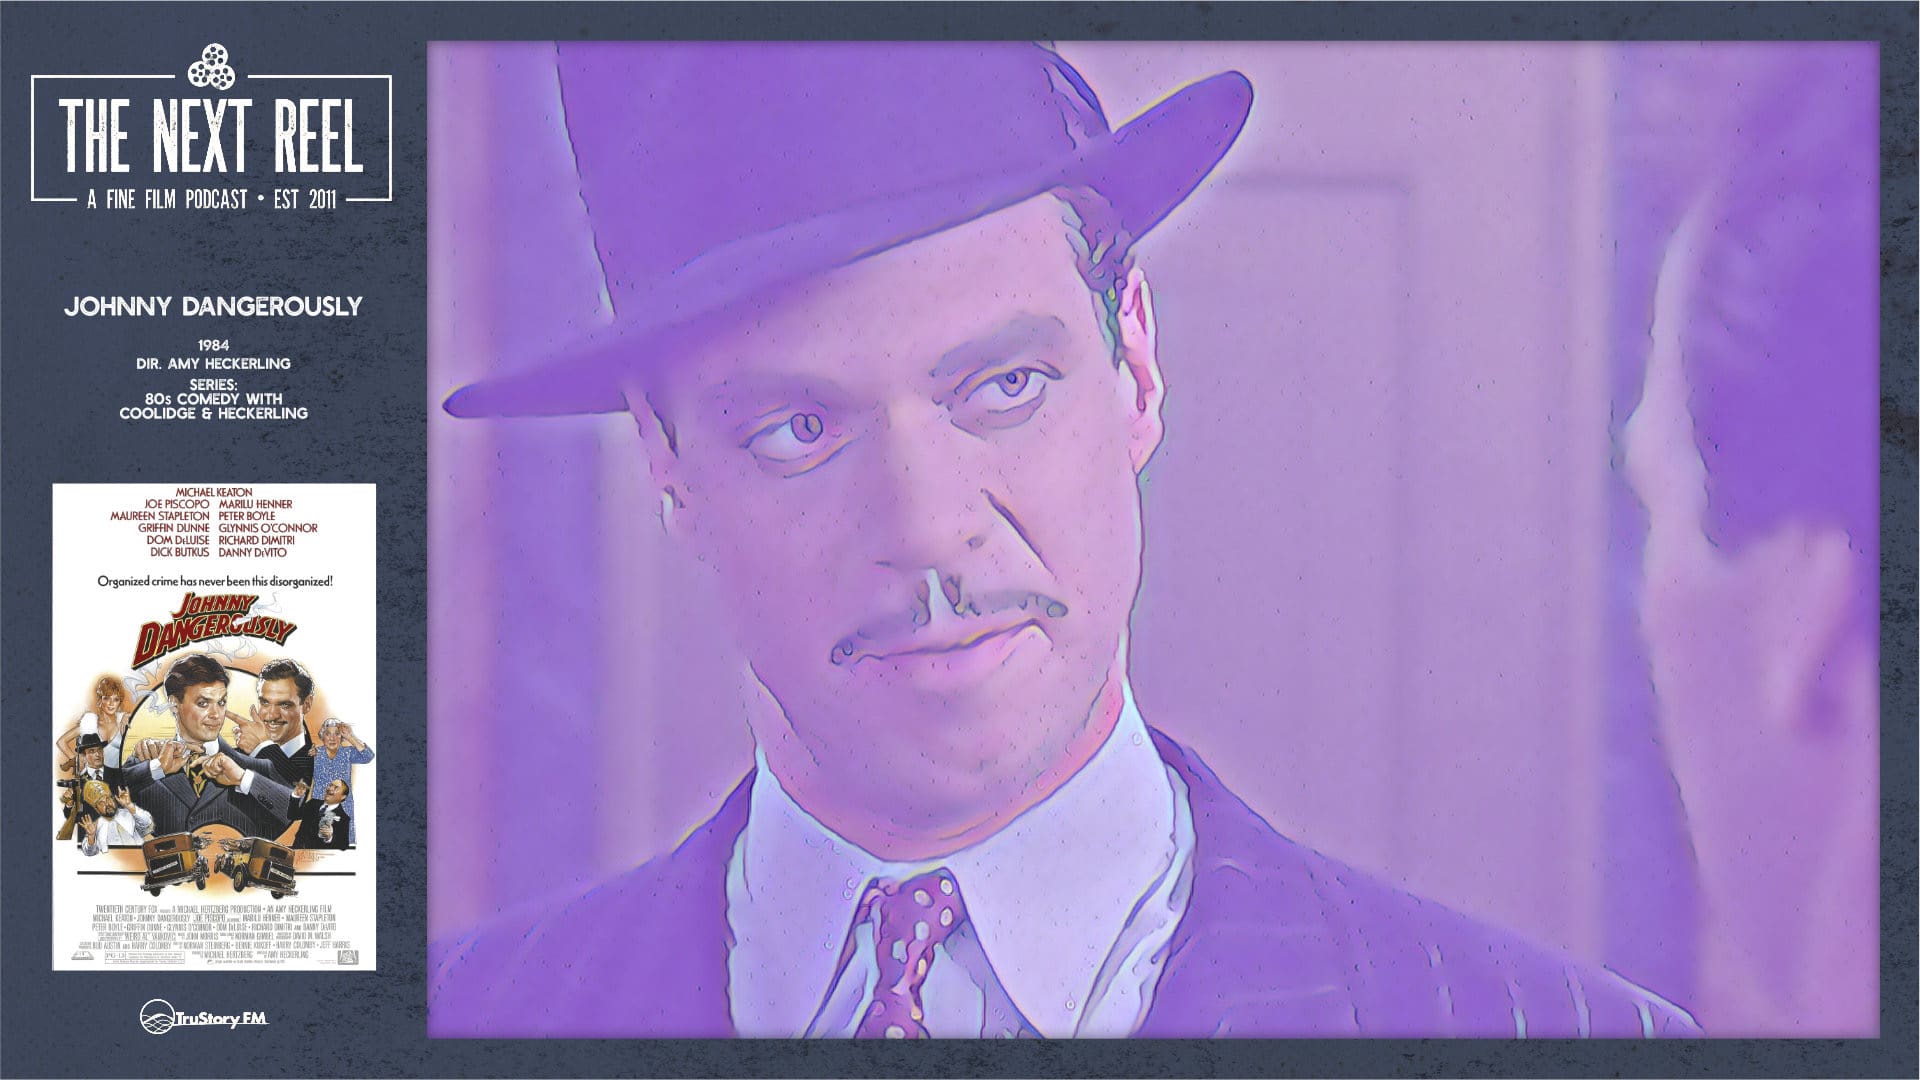 80s Comedy: Johnny Dangerously • The Next Reel Film Podcast